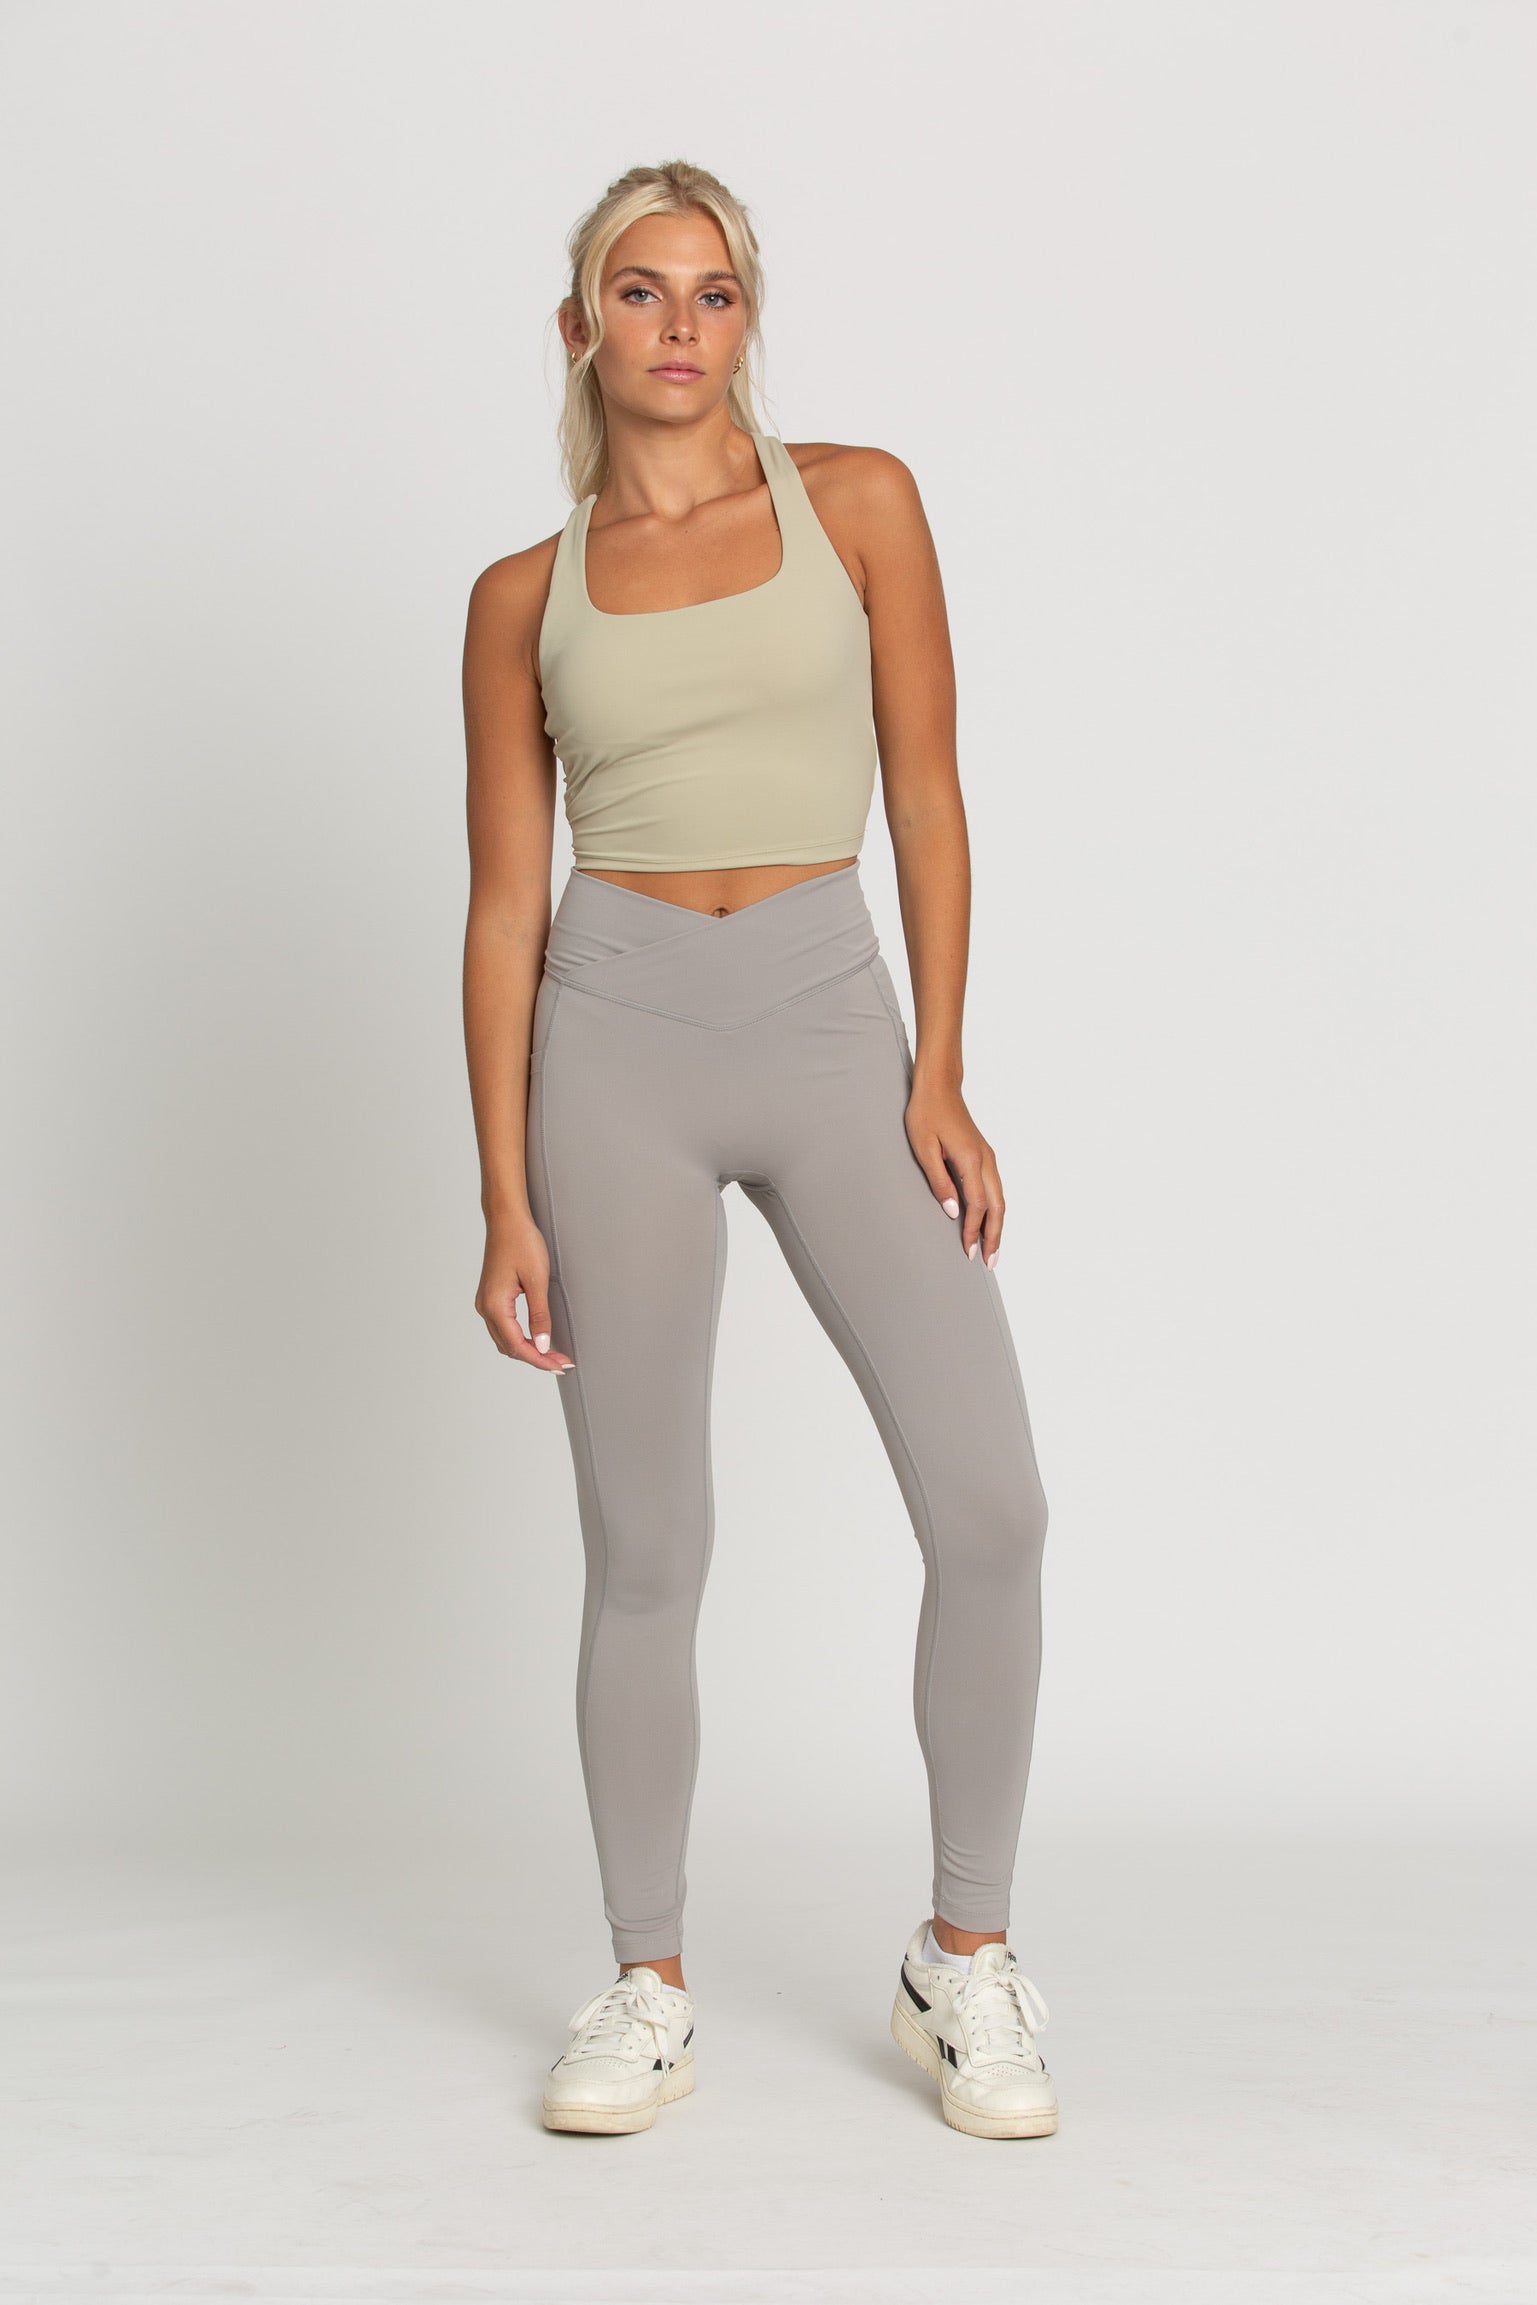 ACA Moon Dust Gray Crossover leggings with pockets